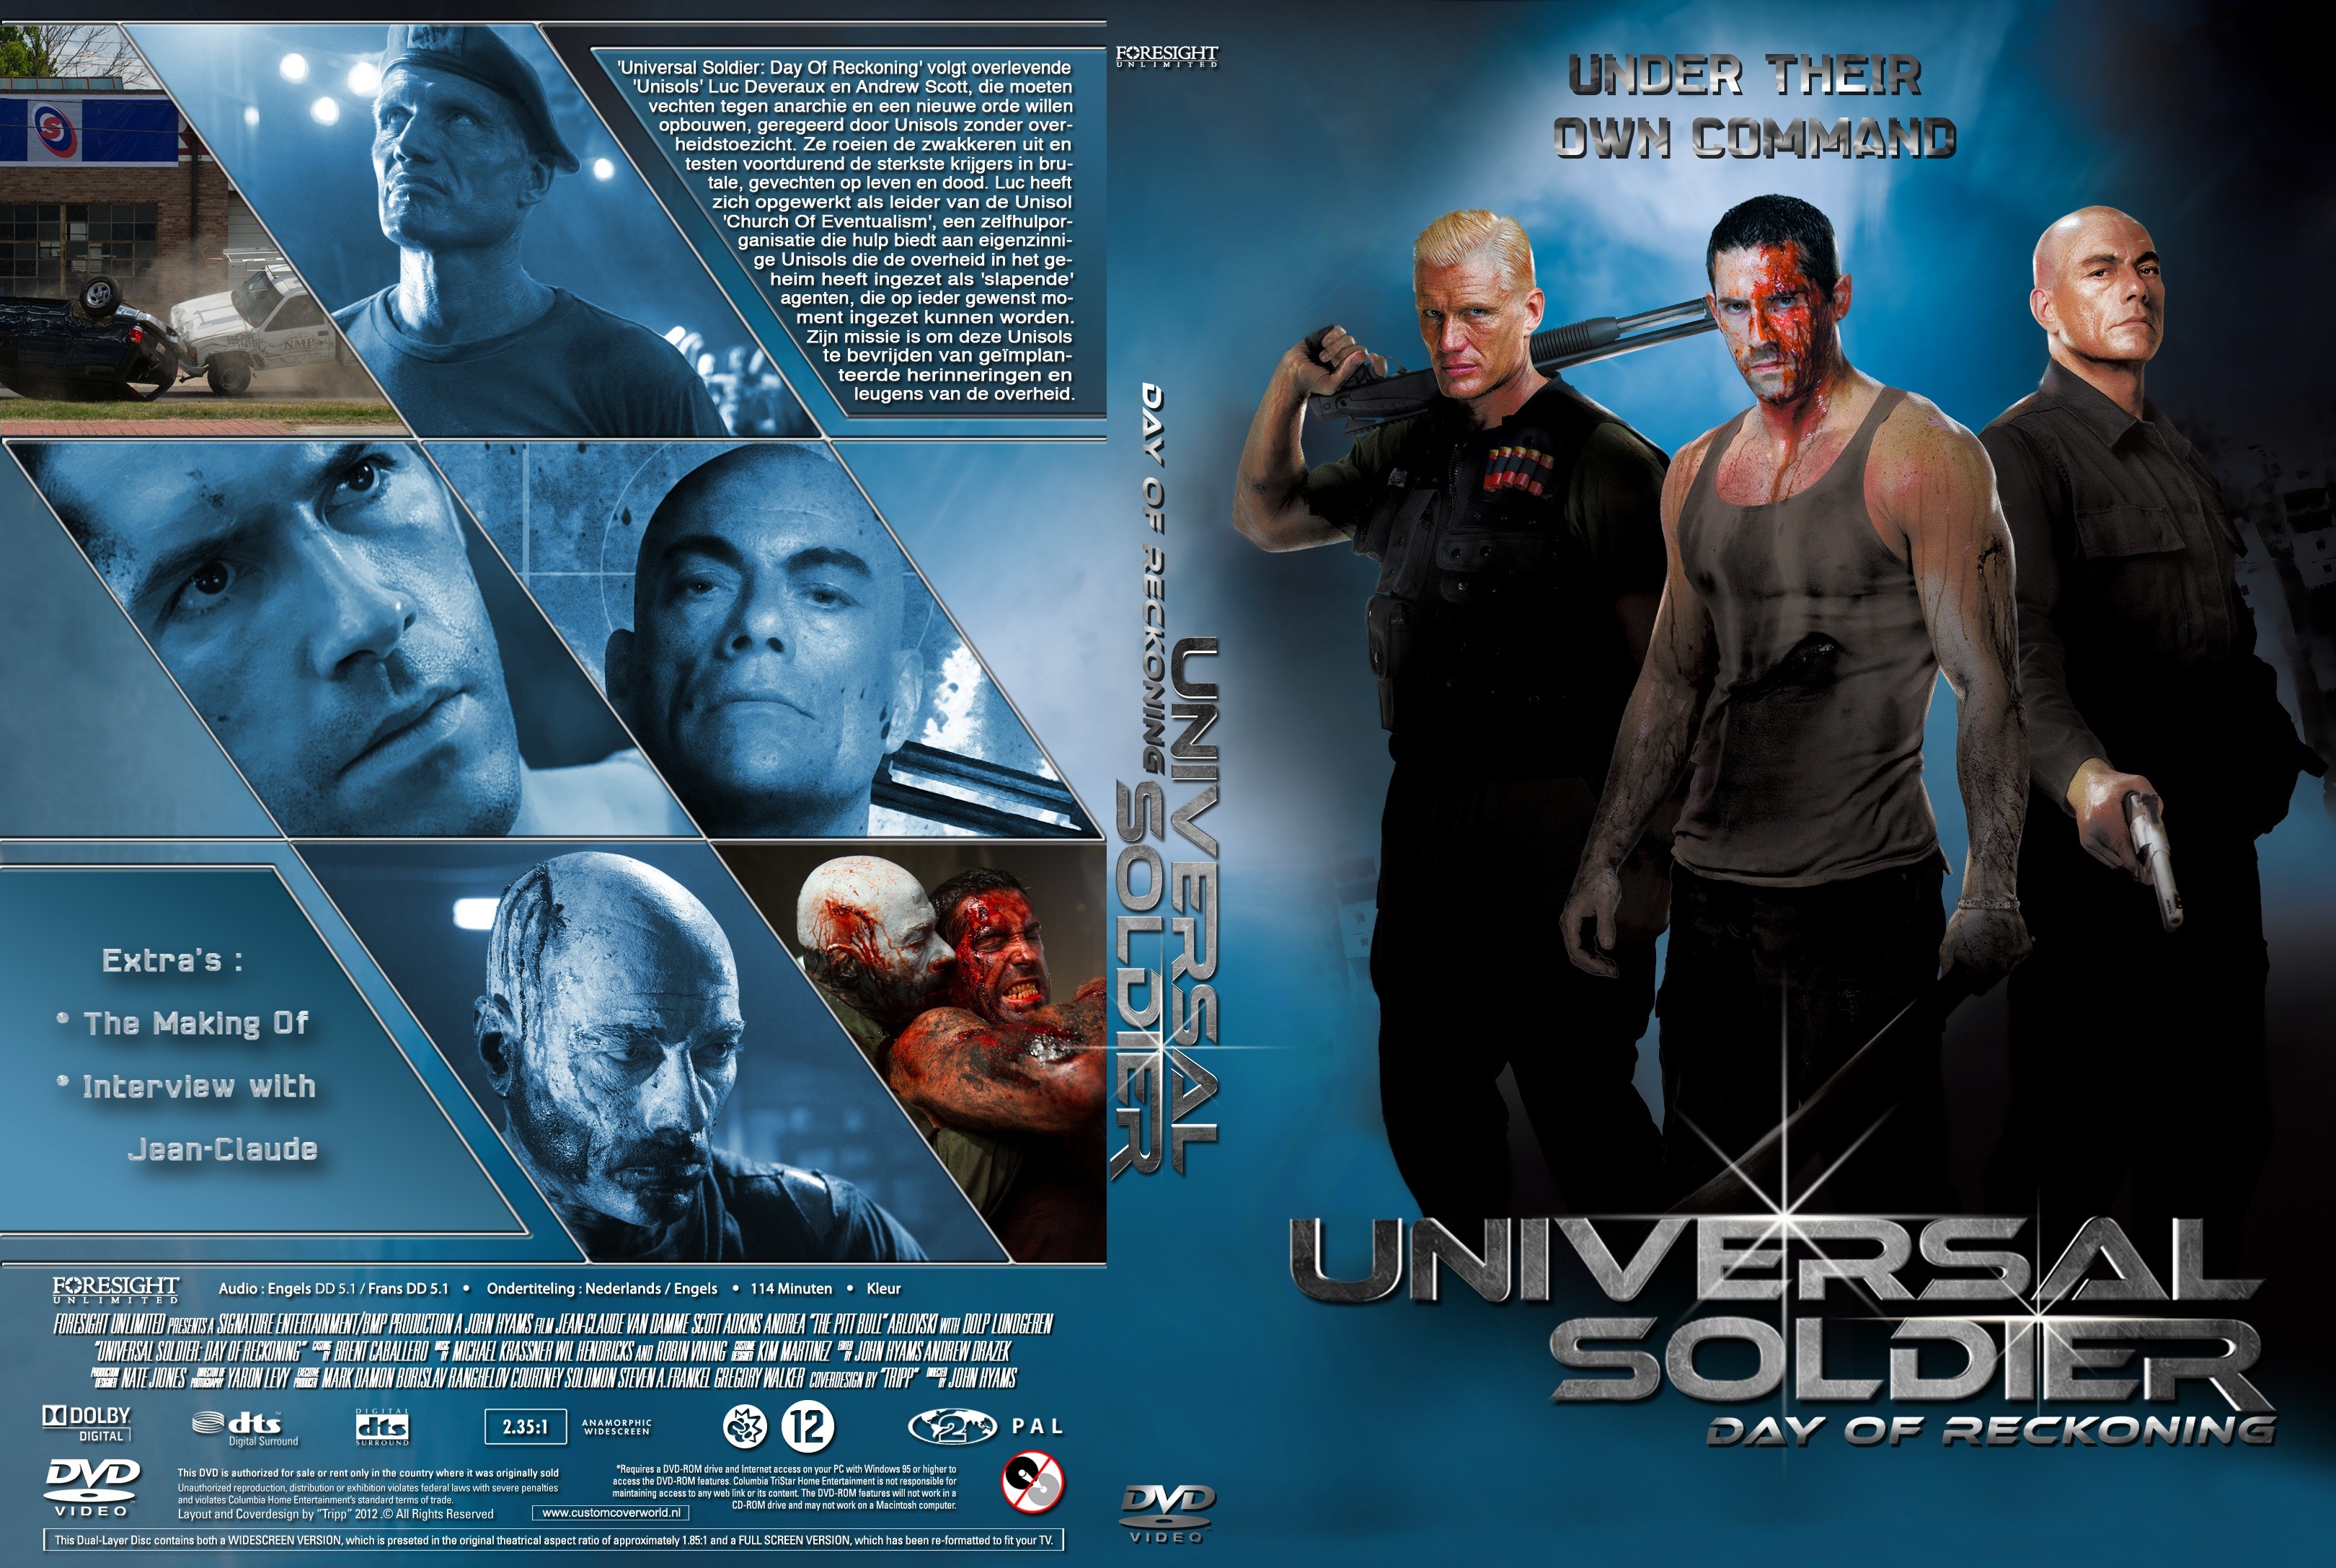 Universal Soldier: Day Of Reckoning Backgrounds, Compatible - PC, Mobile, Gadgets| 3240x2175 px